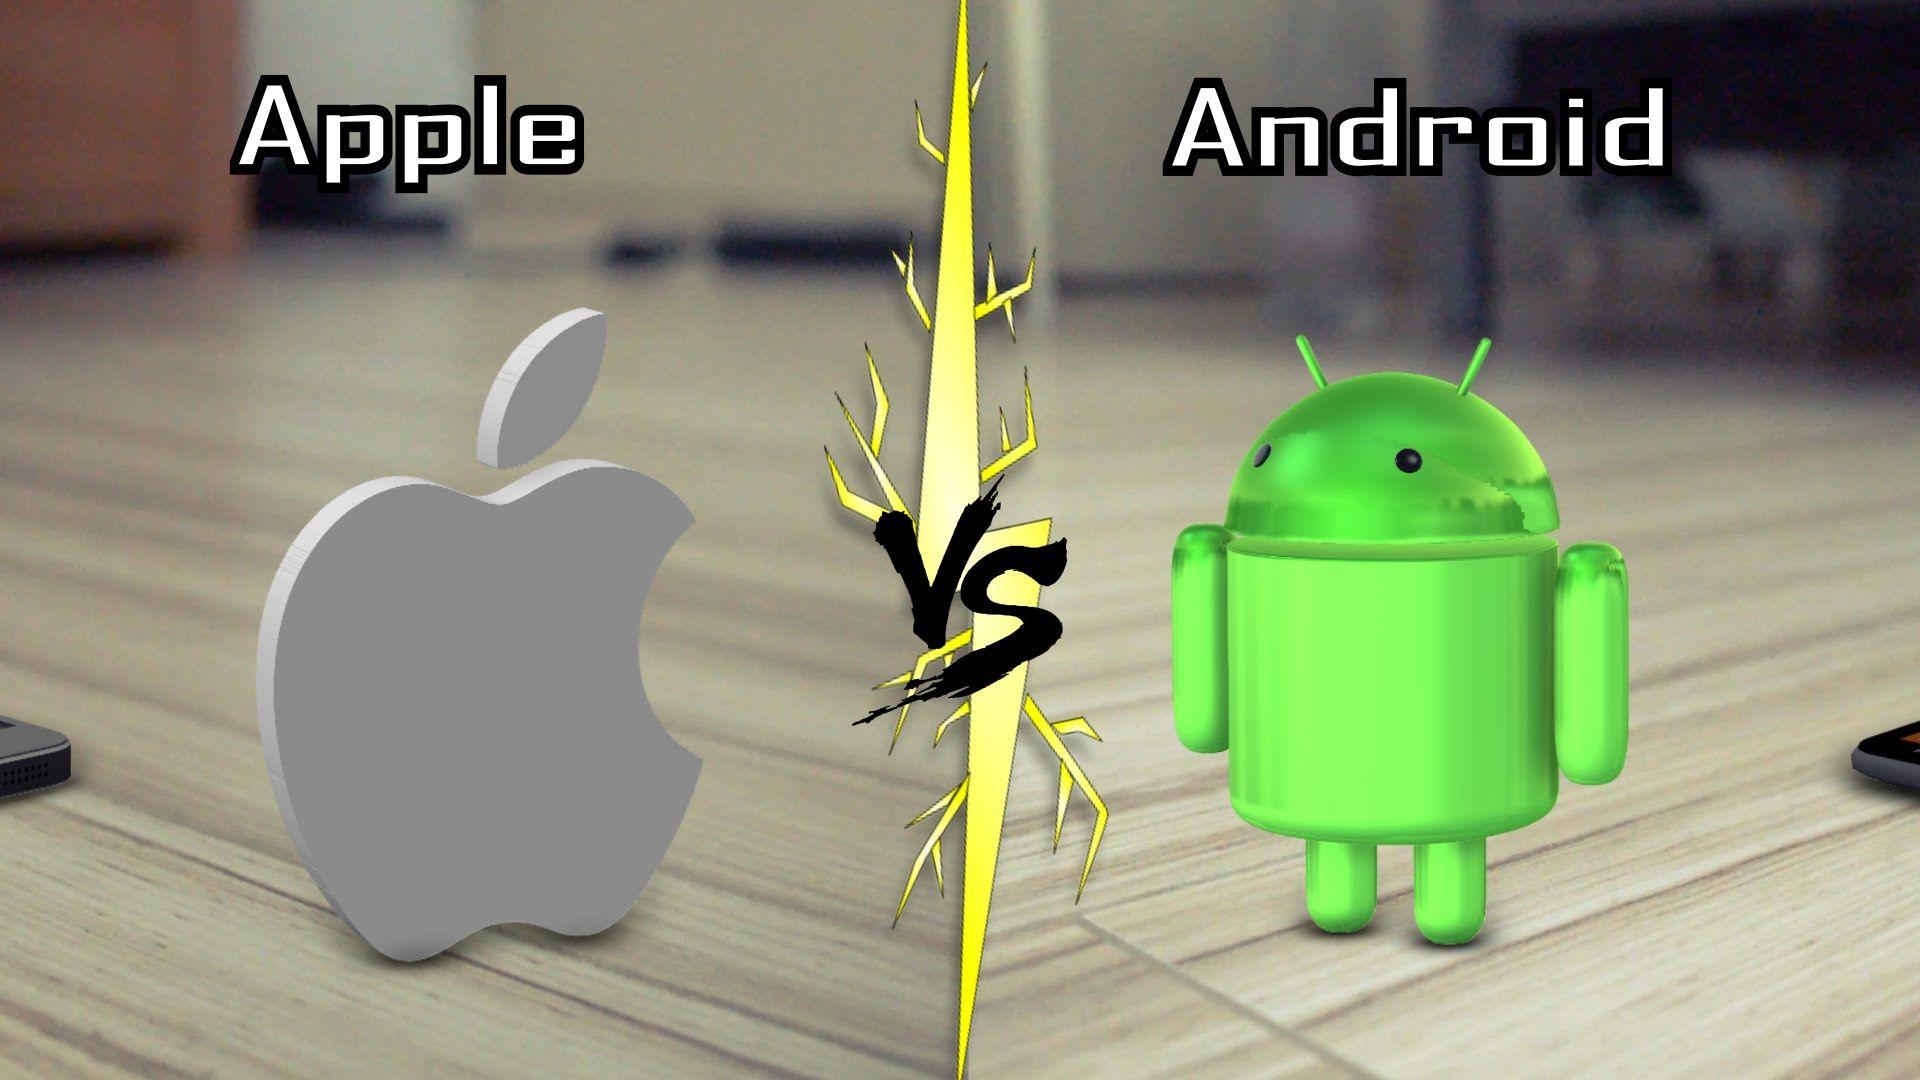 Apple vs Android In Real Life